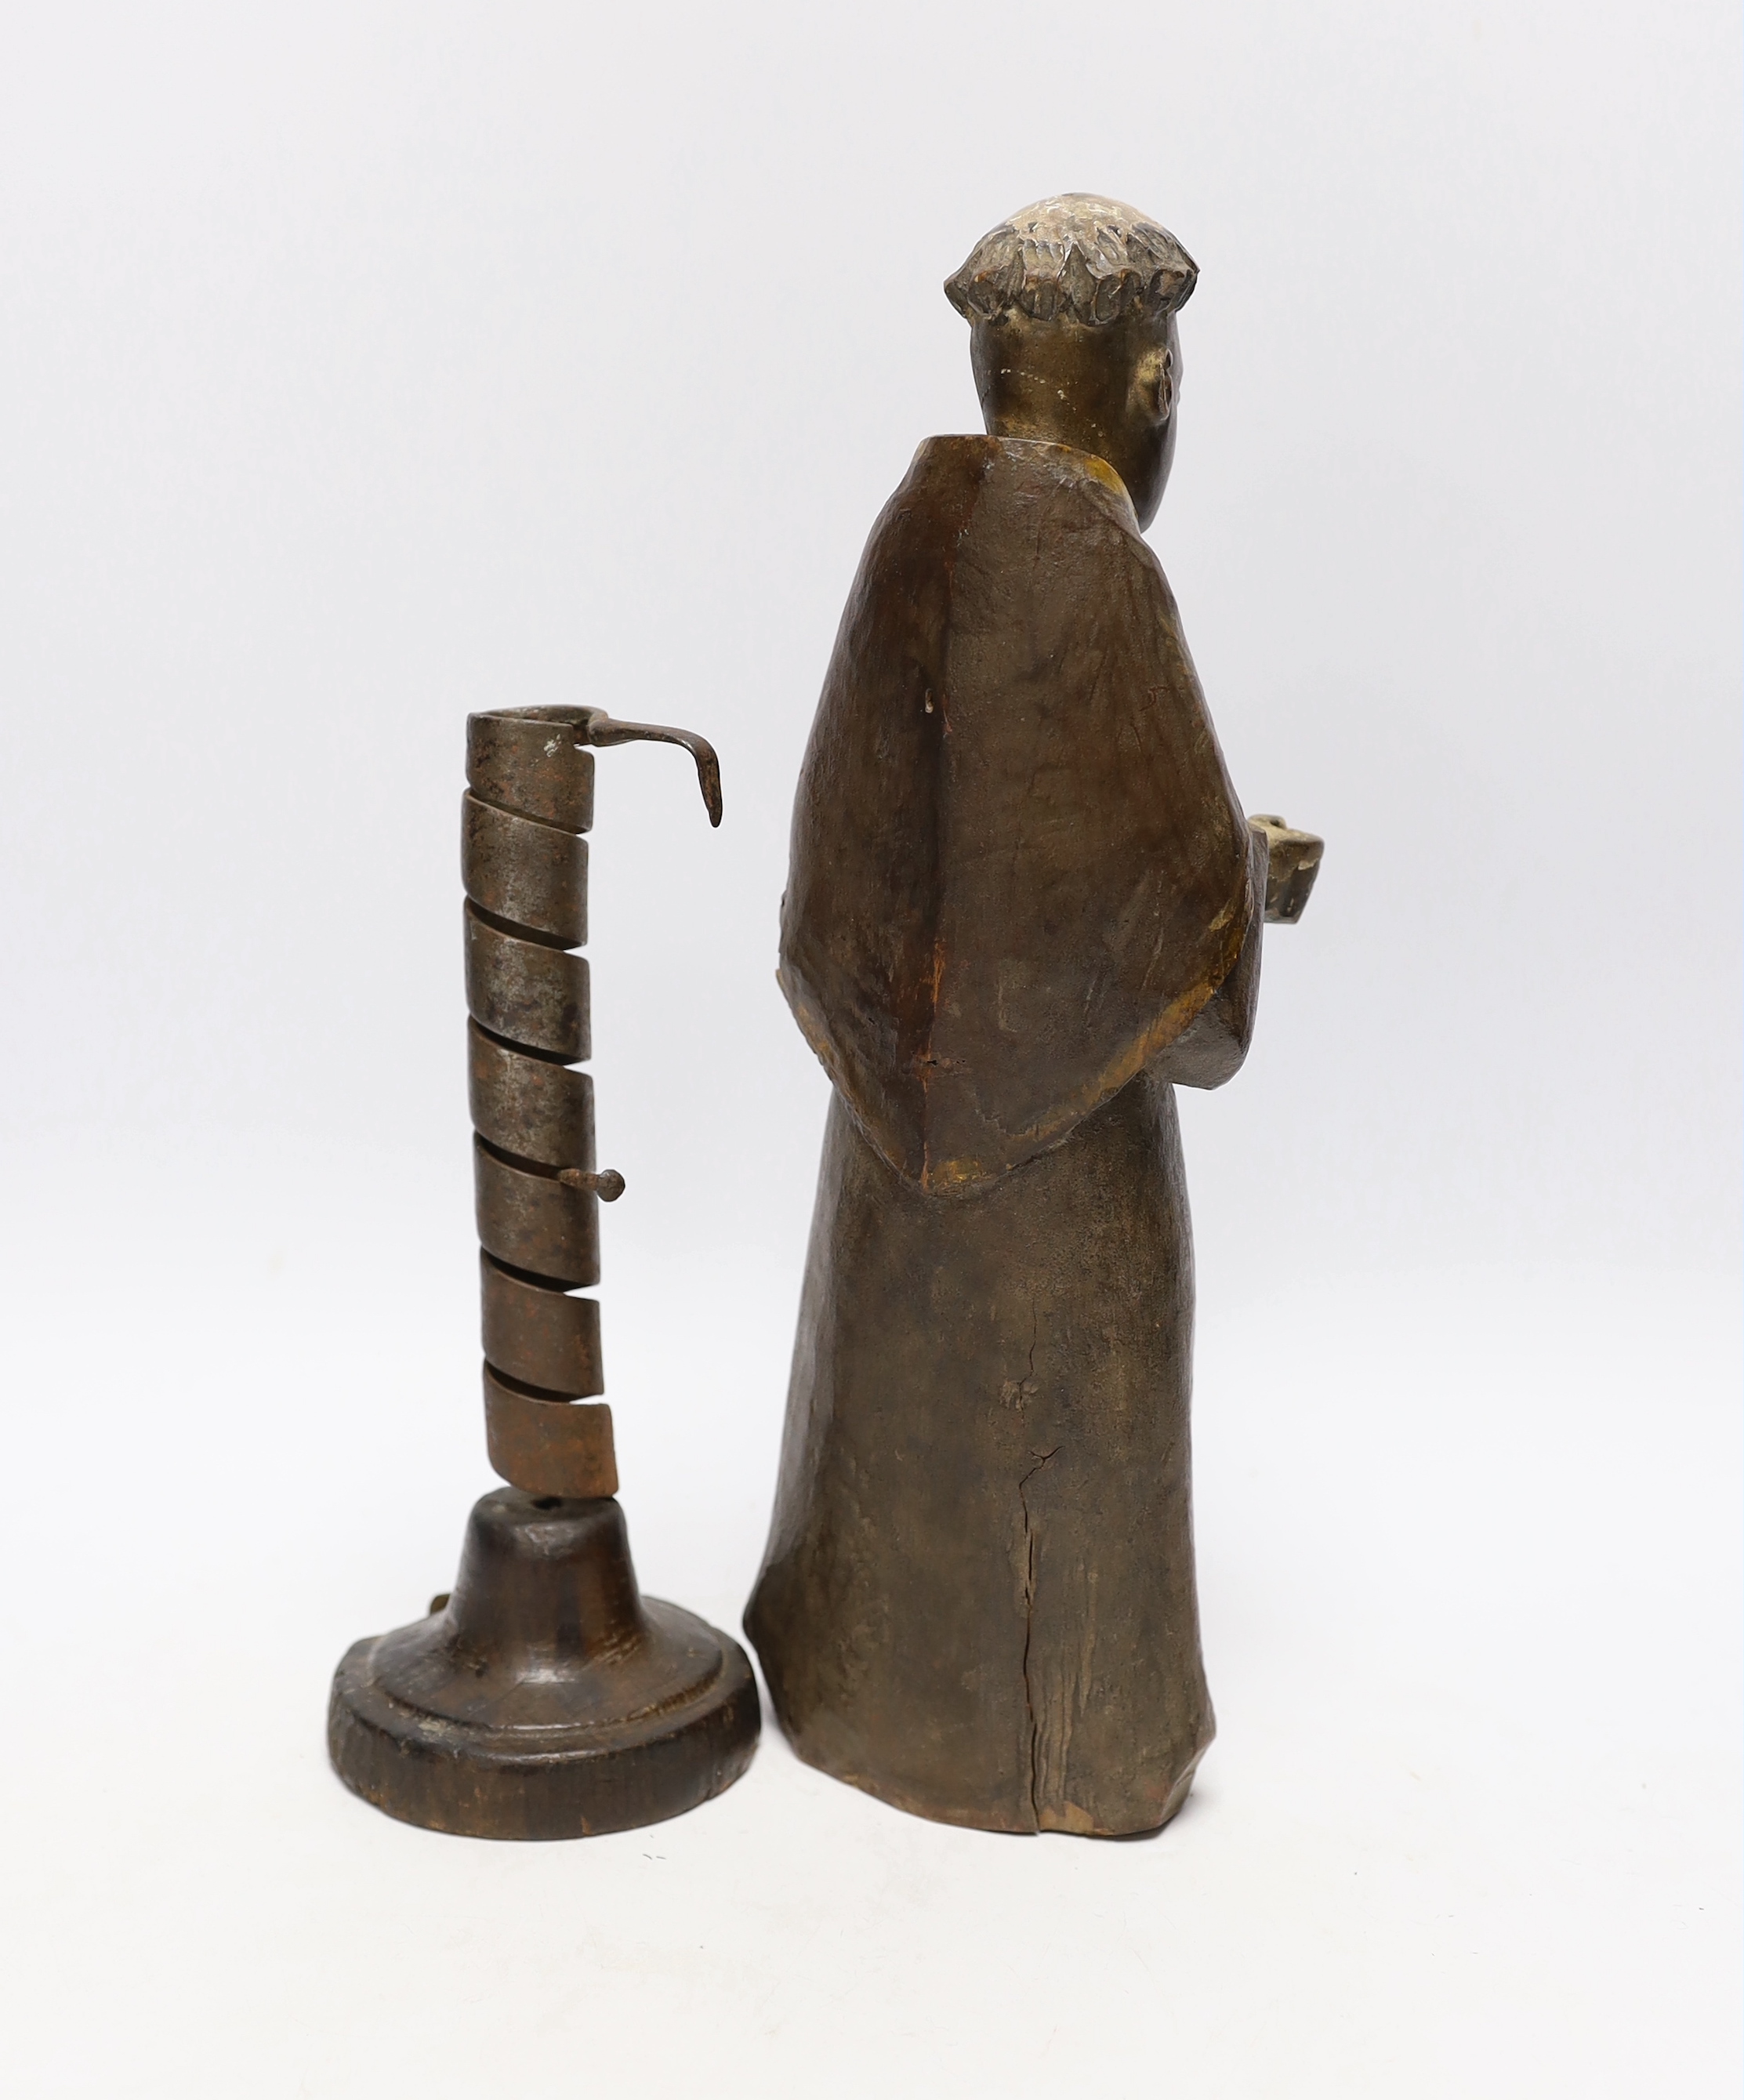 An 18th century Spanish carved and painted wood figure of a monk and 18th century ‘rat de cave’ candlestick, wooden knight 32cm high